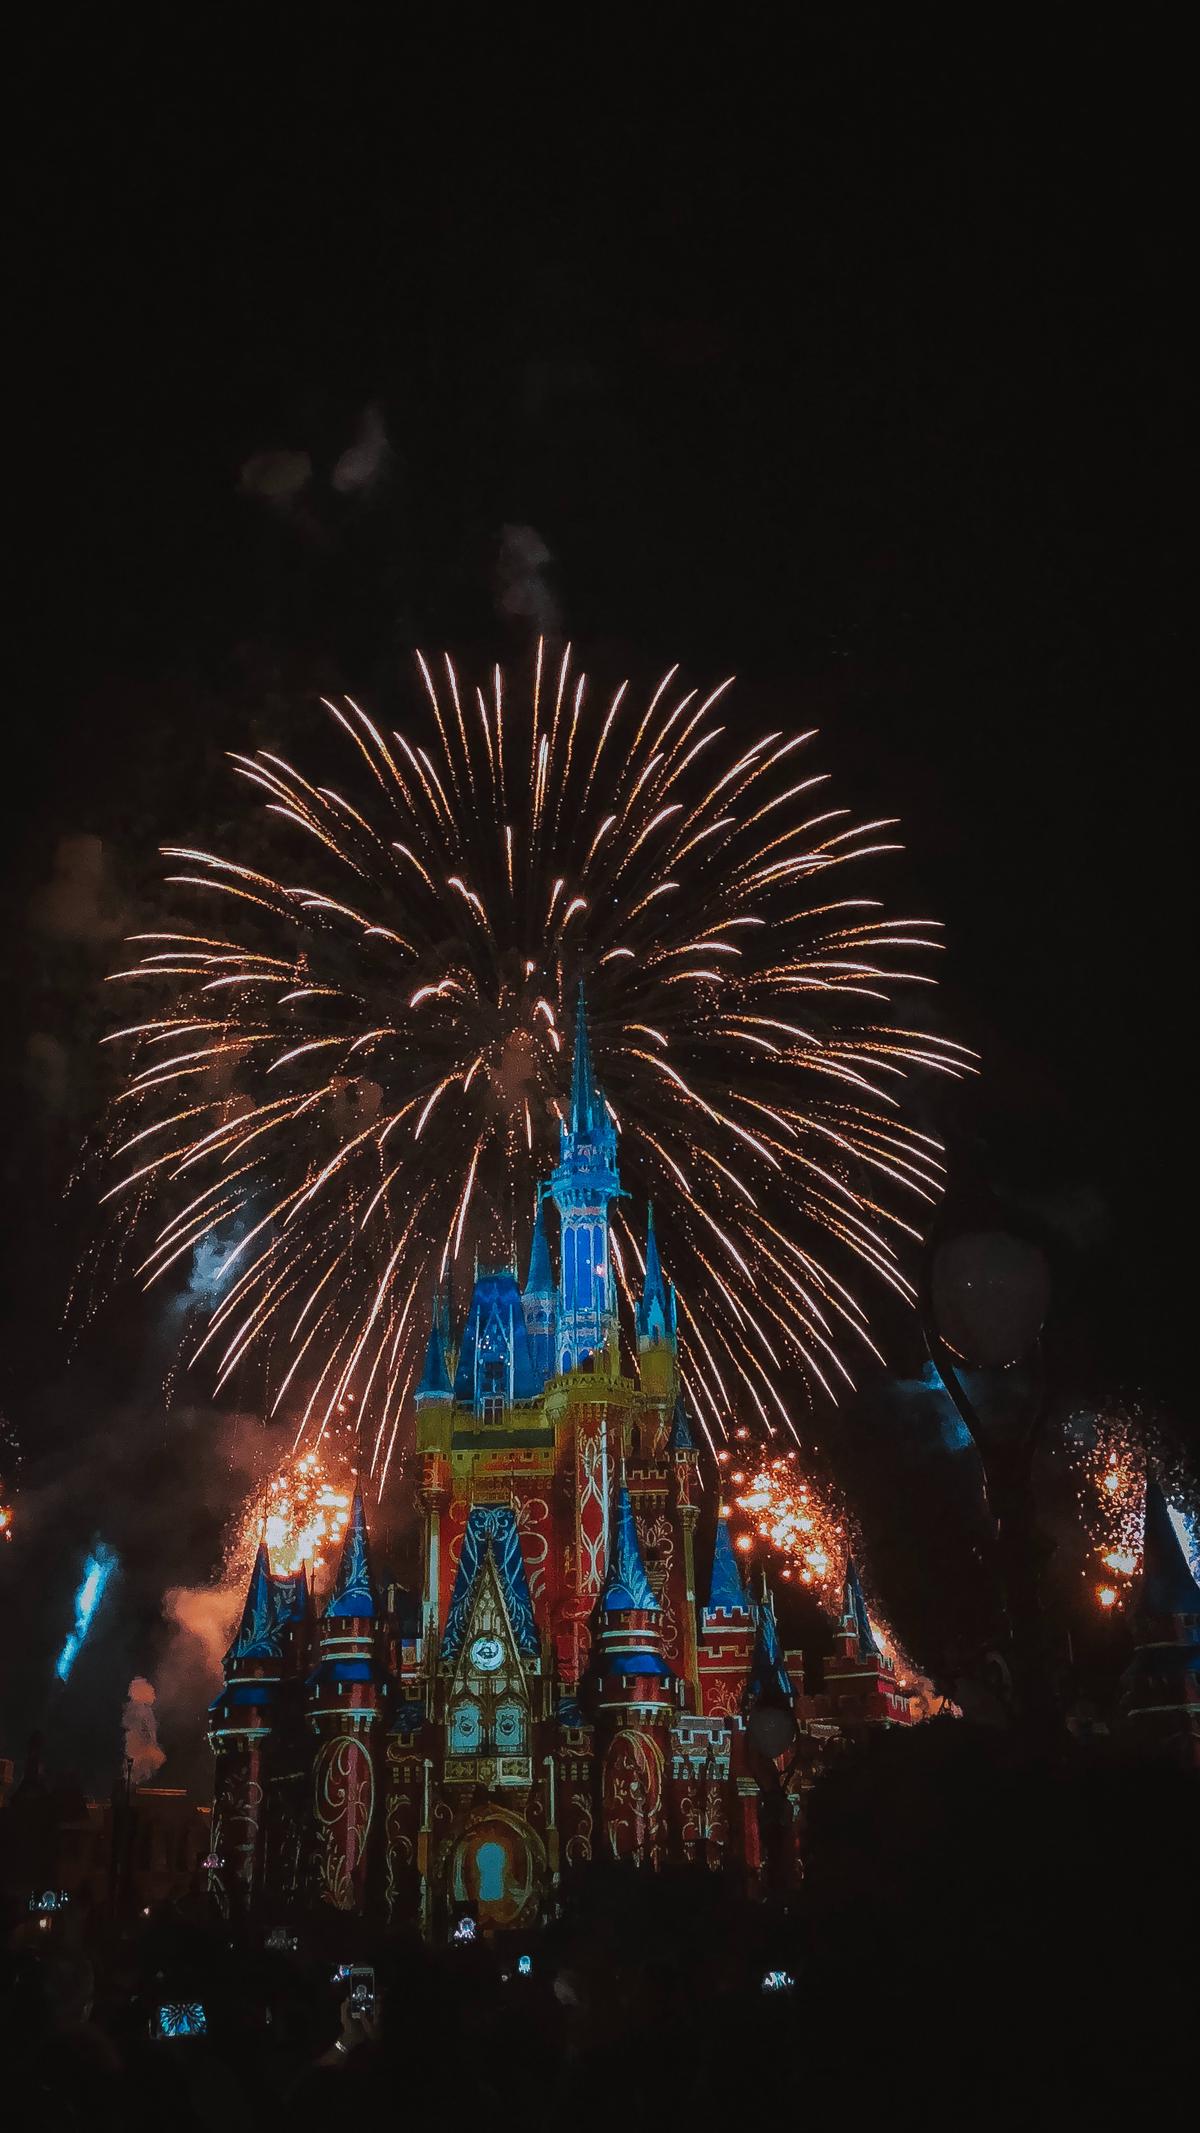 Image of Disney night shows with colorful fireworks and illuminated castle